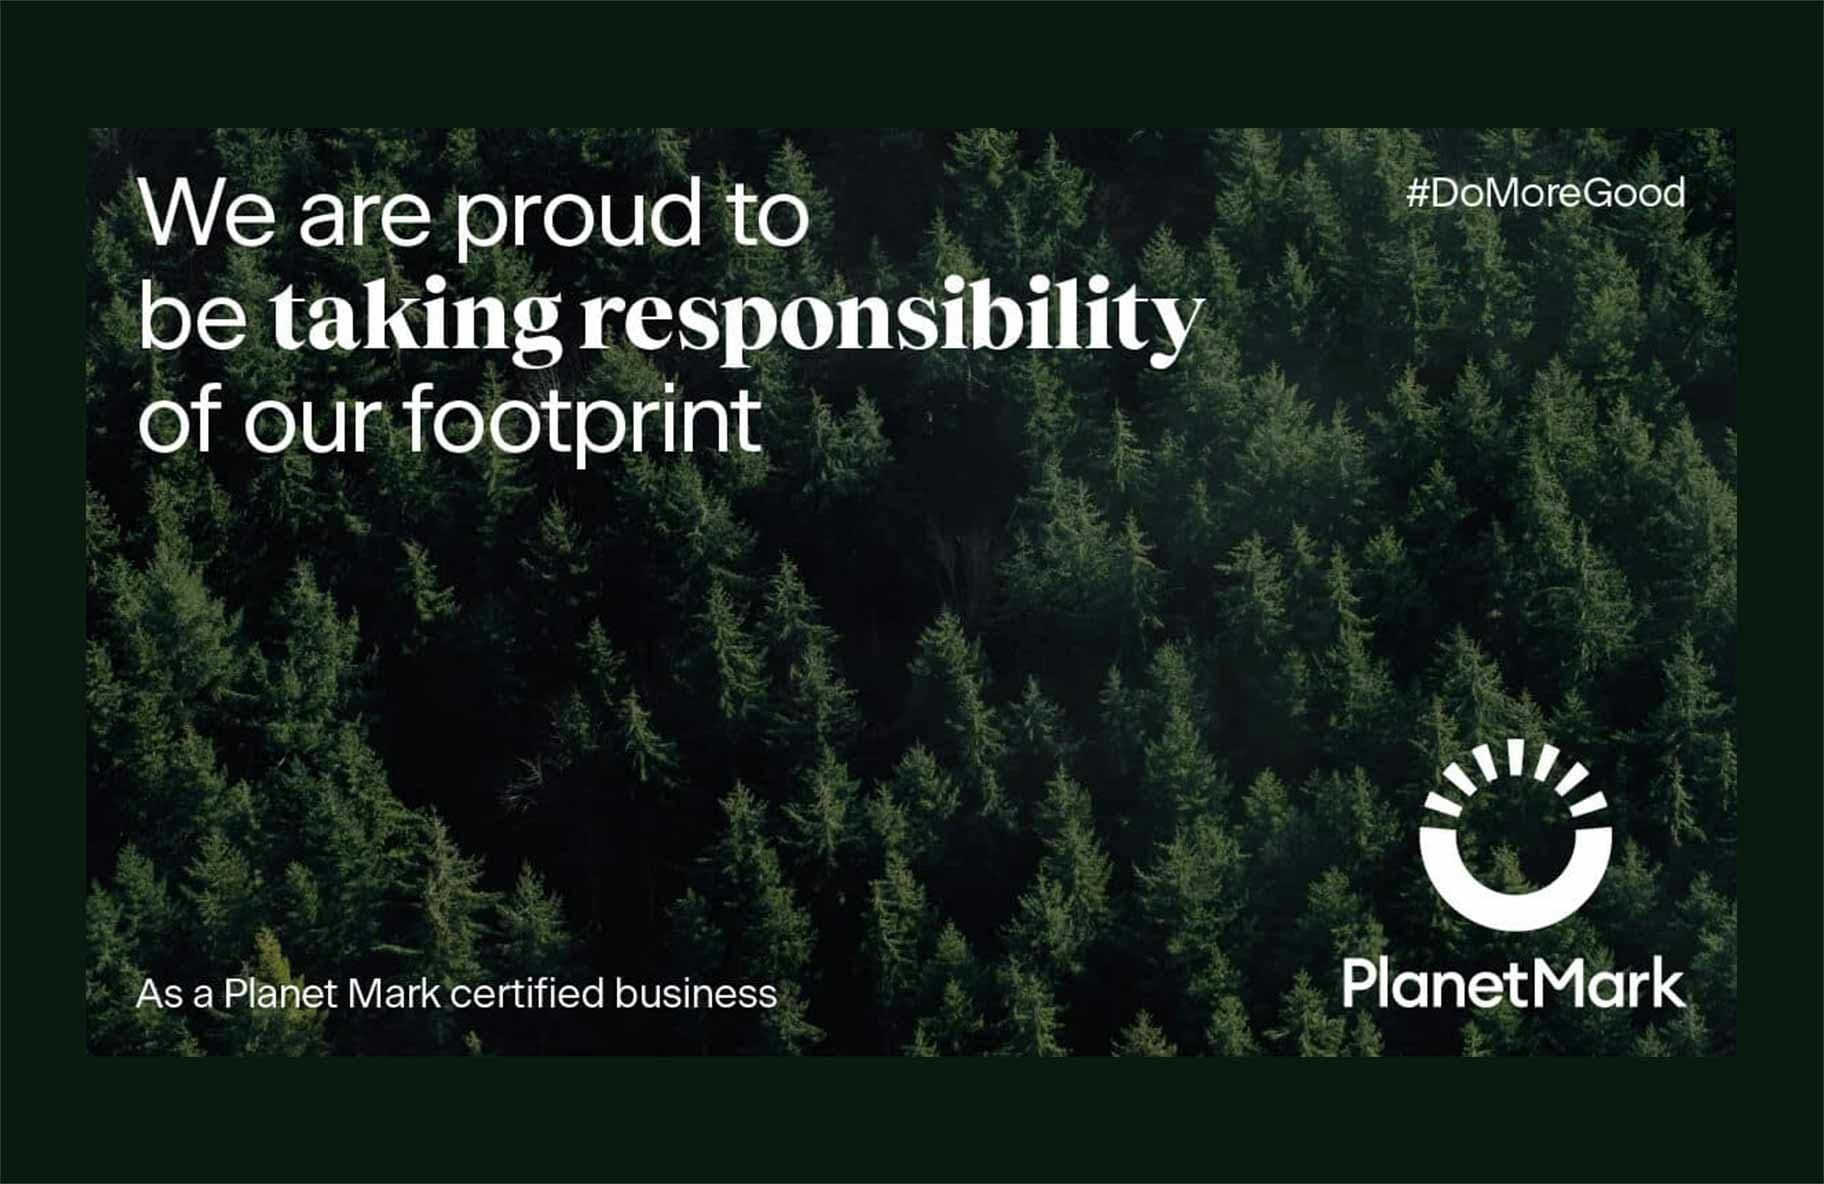 Axminster Tools are Planet Mark certified